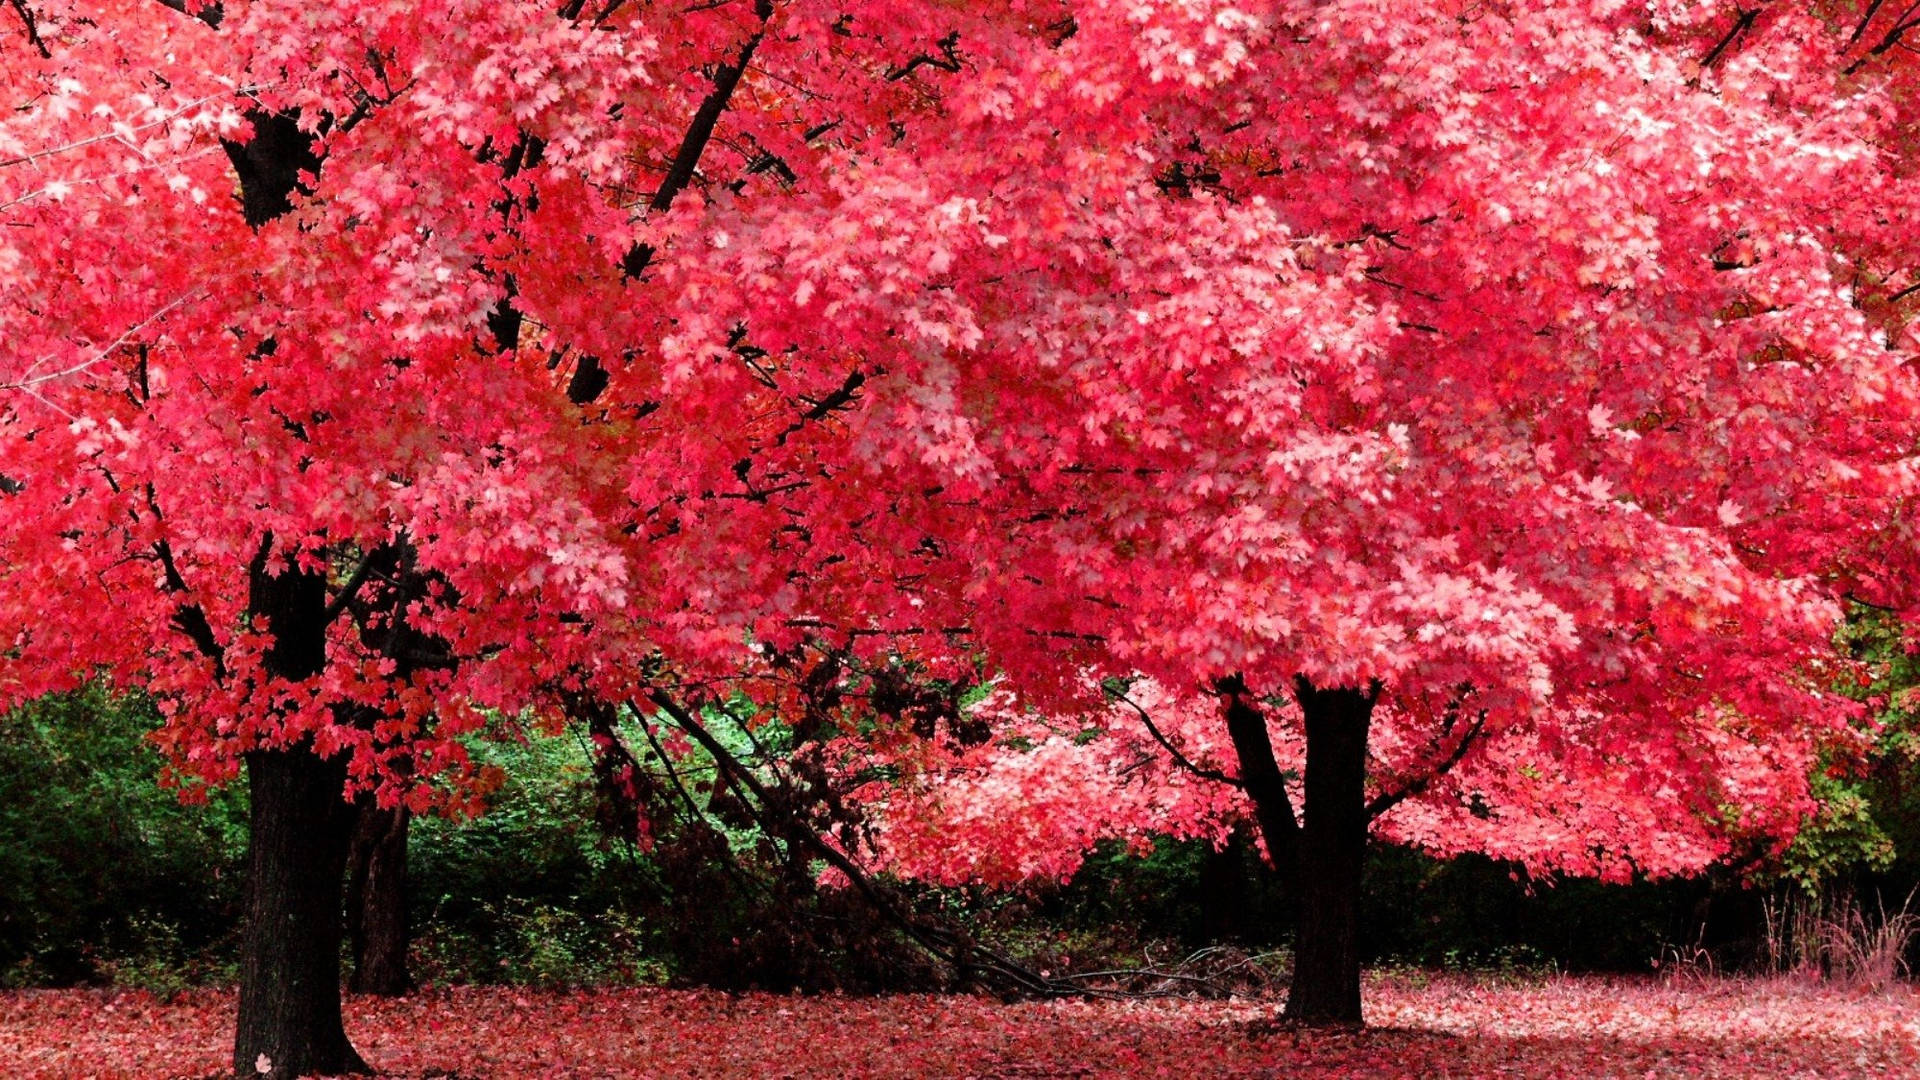 Download Aesthetic Fall Red Maple Trees Wallpaper